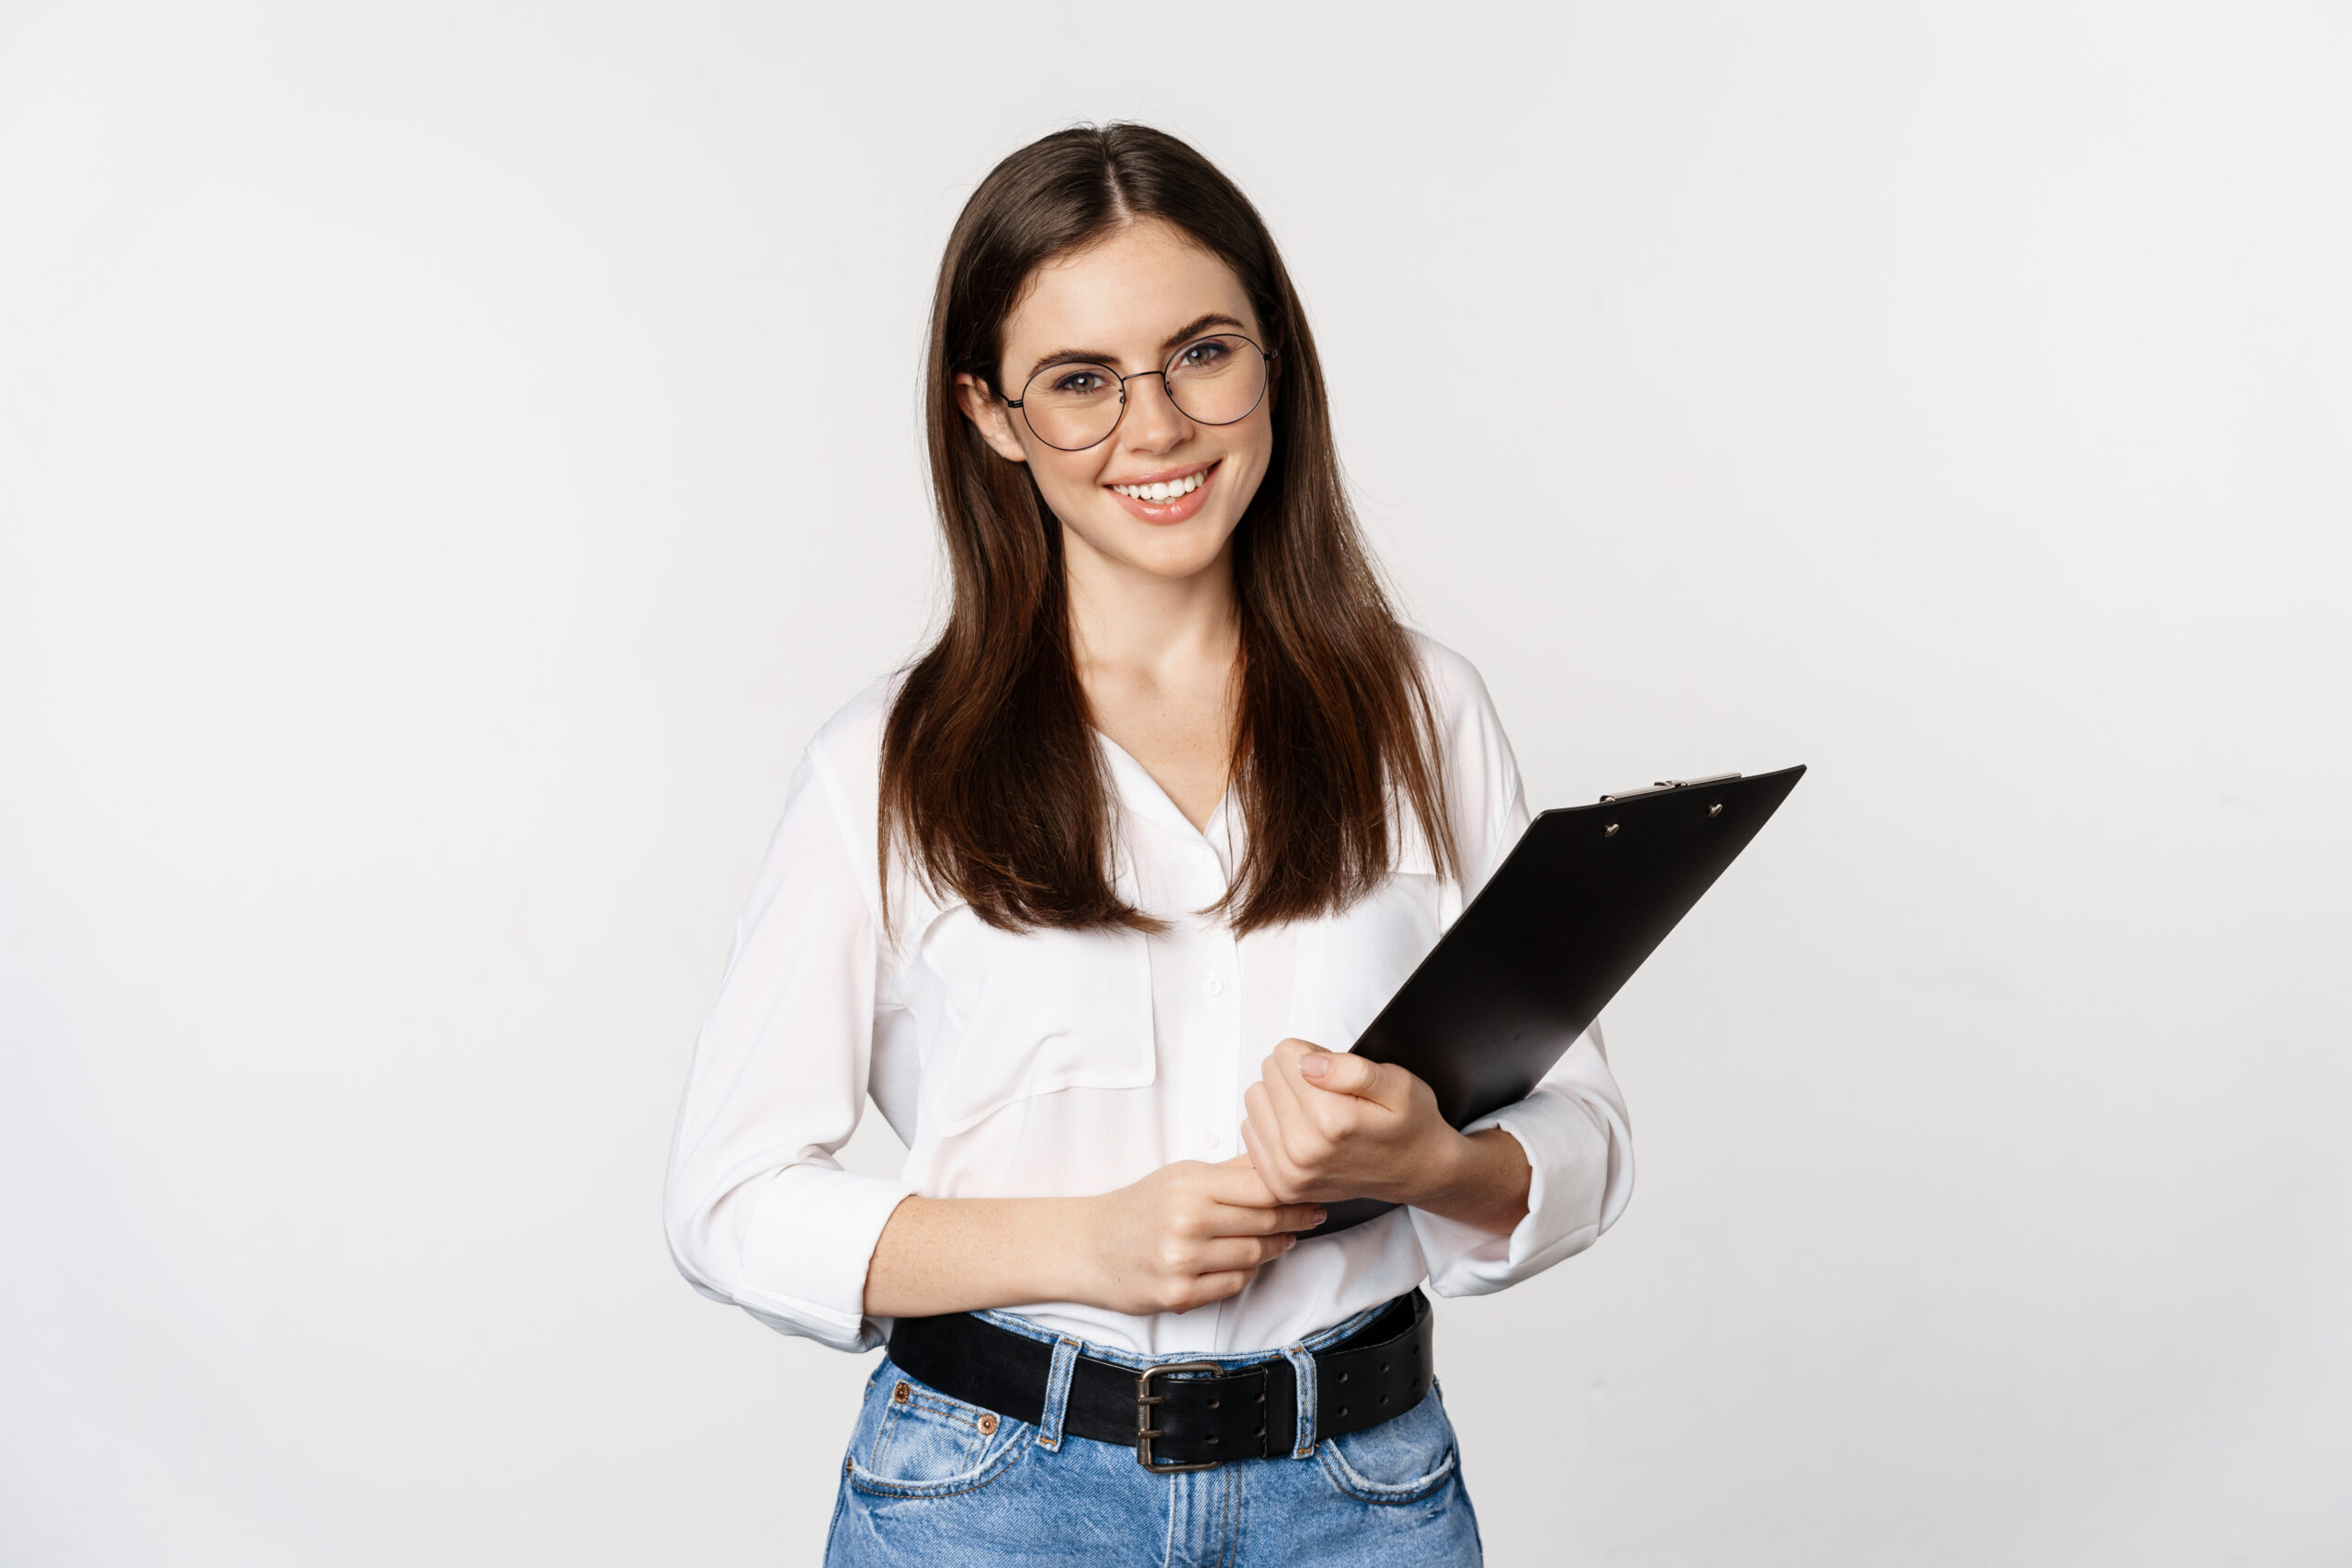 Portrait of corporate woman holding clipboard at work, standing in formal outfit over white background.